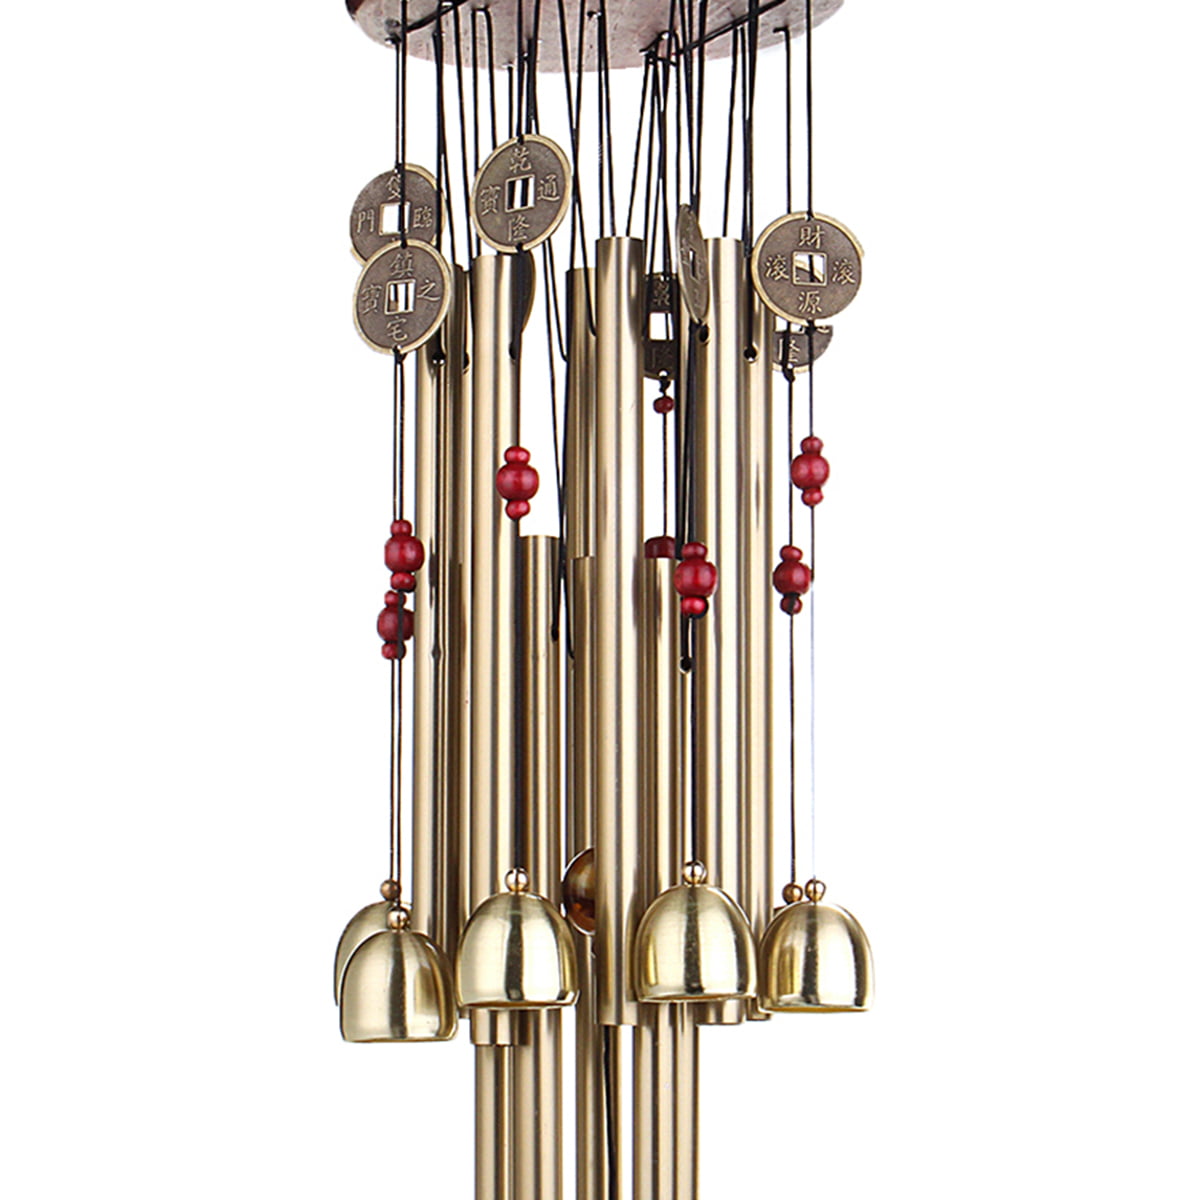 Bamboo Wind Chimes 5 Tubes Garden Feng Shui Decoration #2 